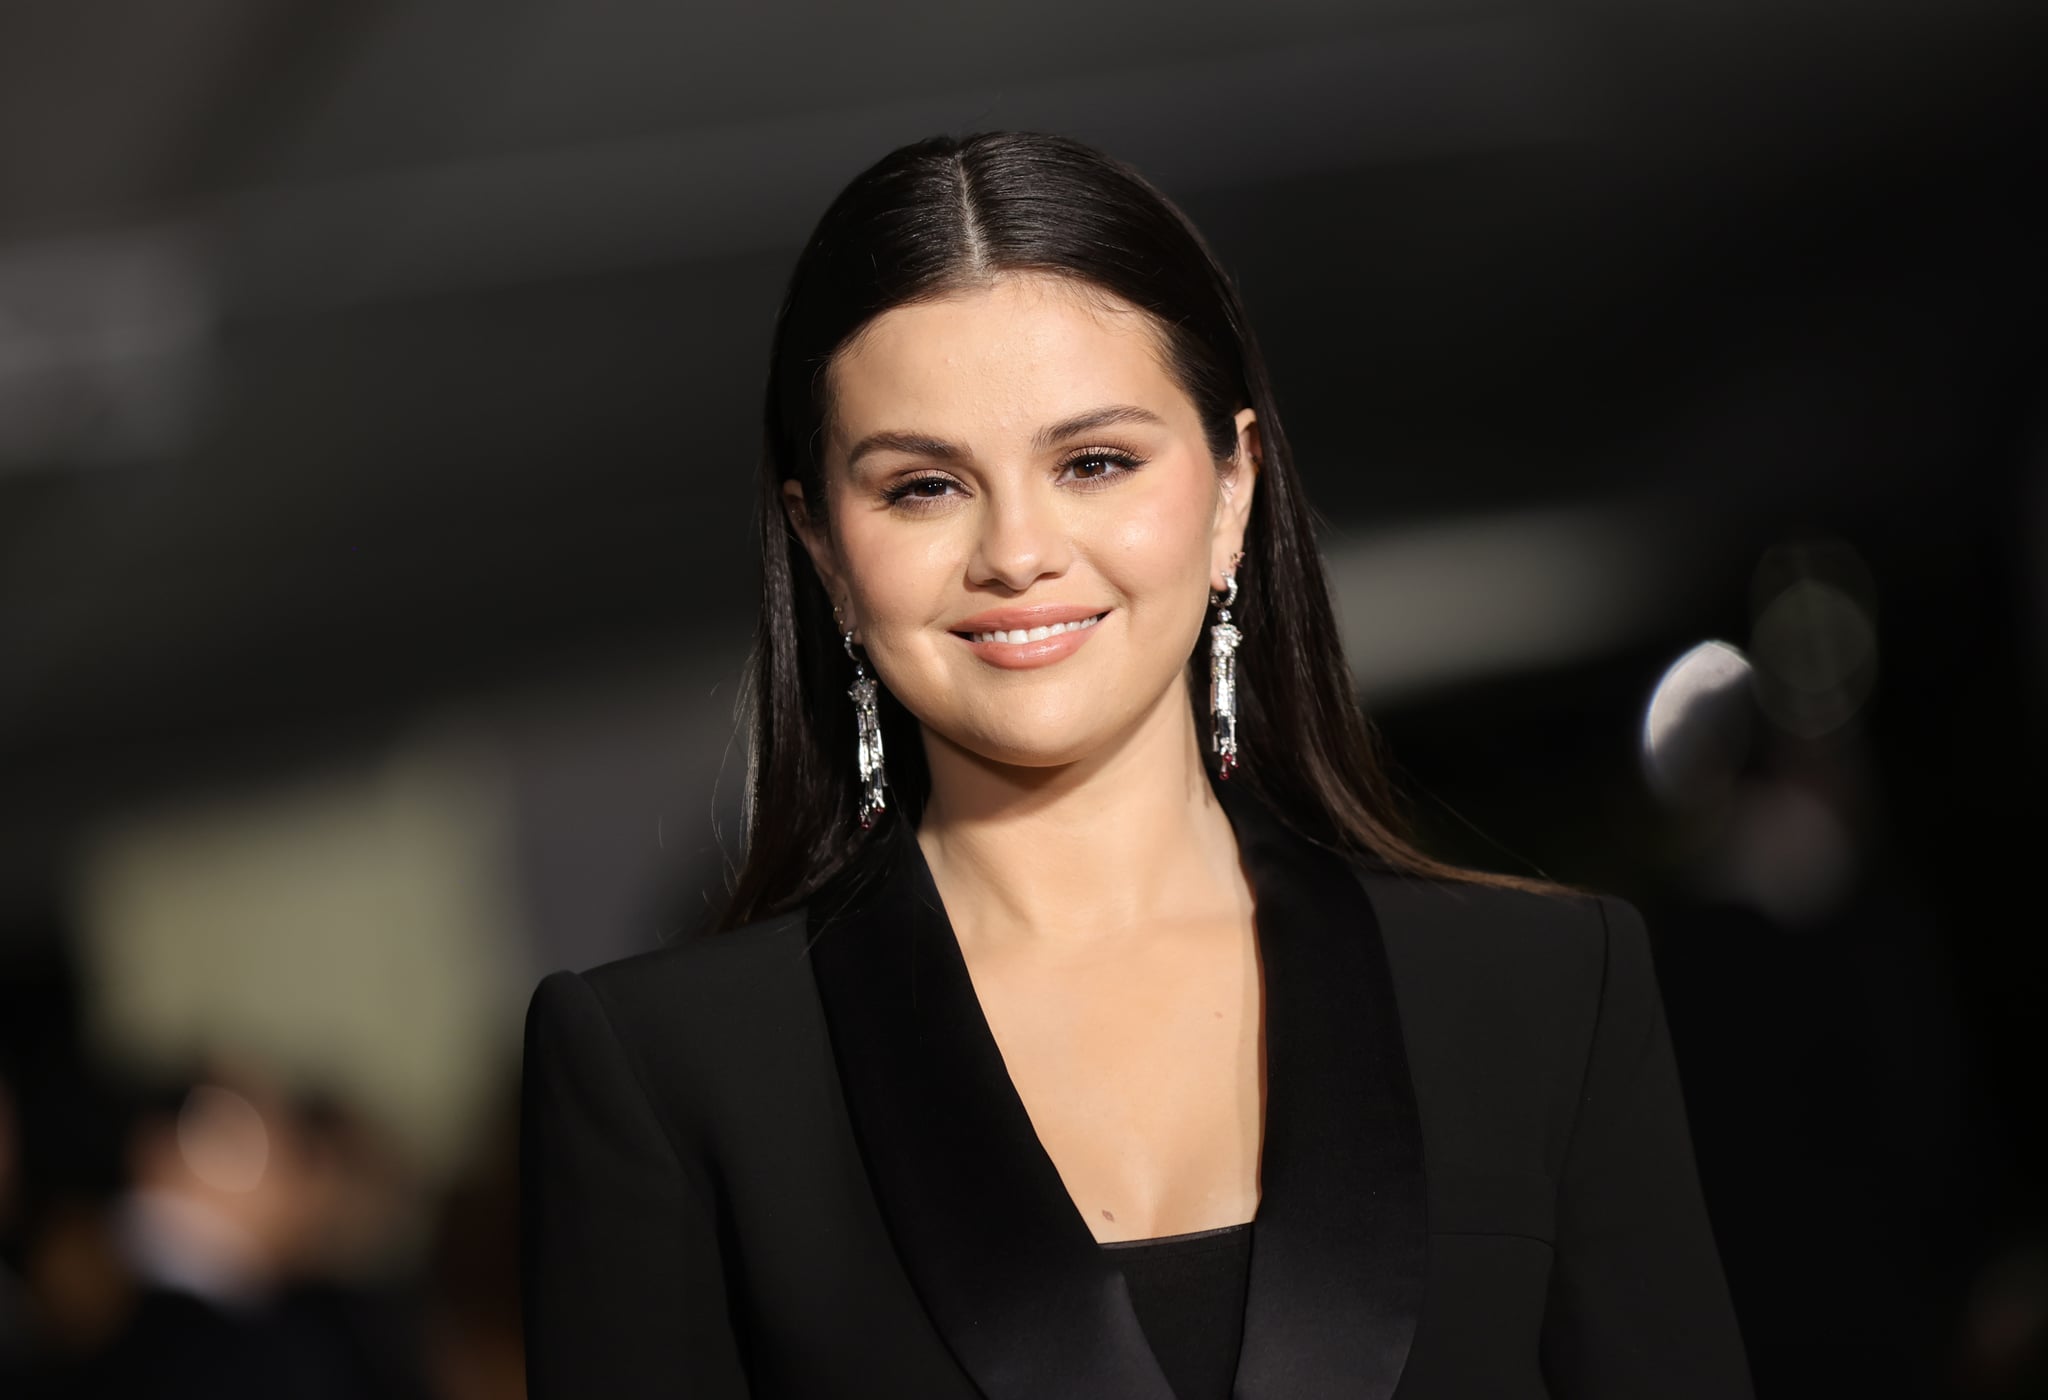 Selena Gomez attends the 2nd Annual Academy Museum Gala at the Academy Museum of Motion Pictures